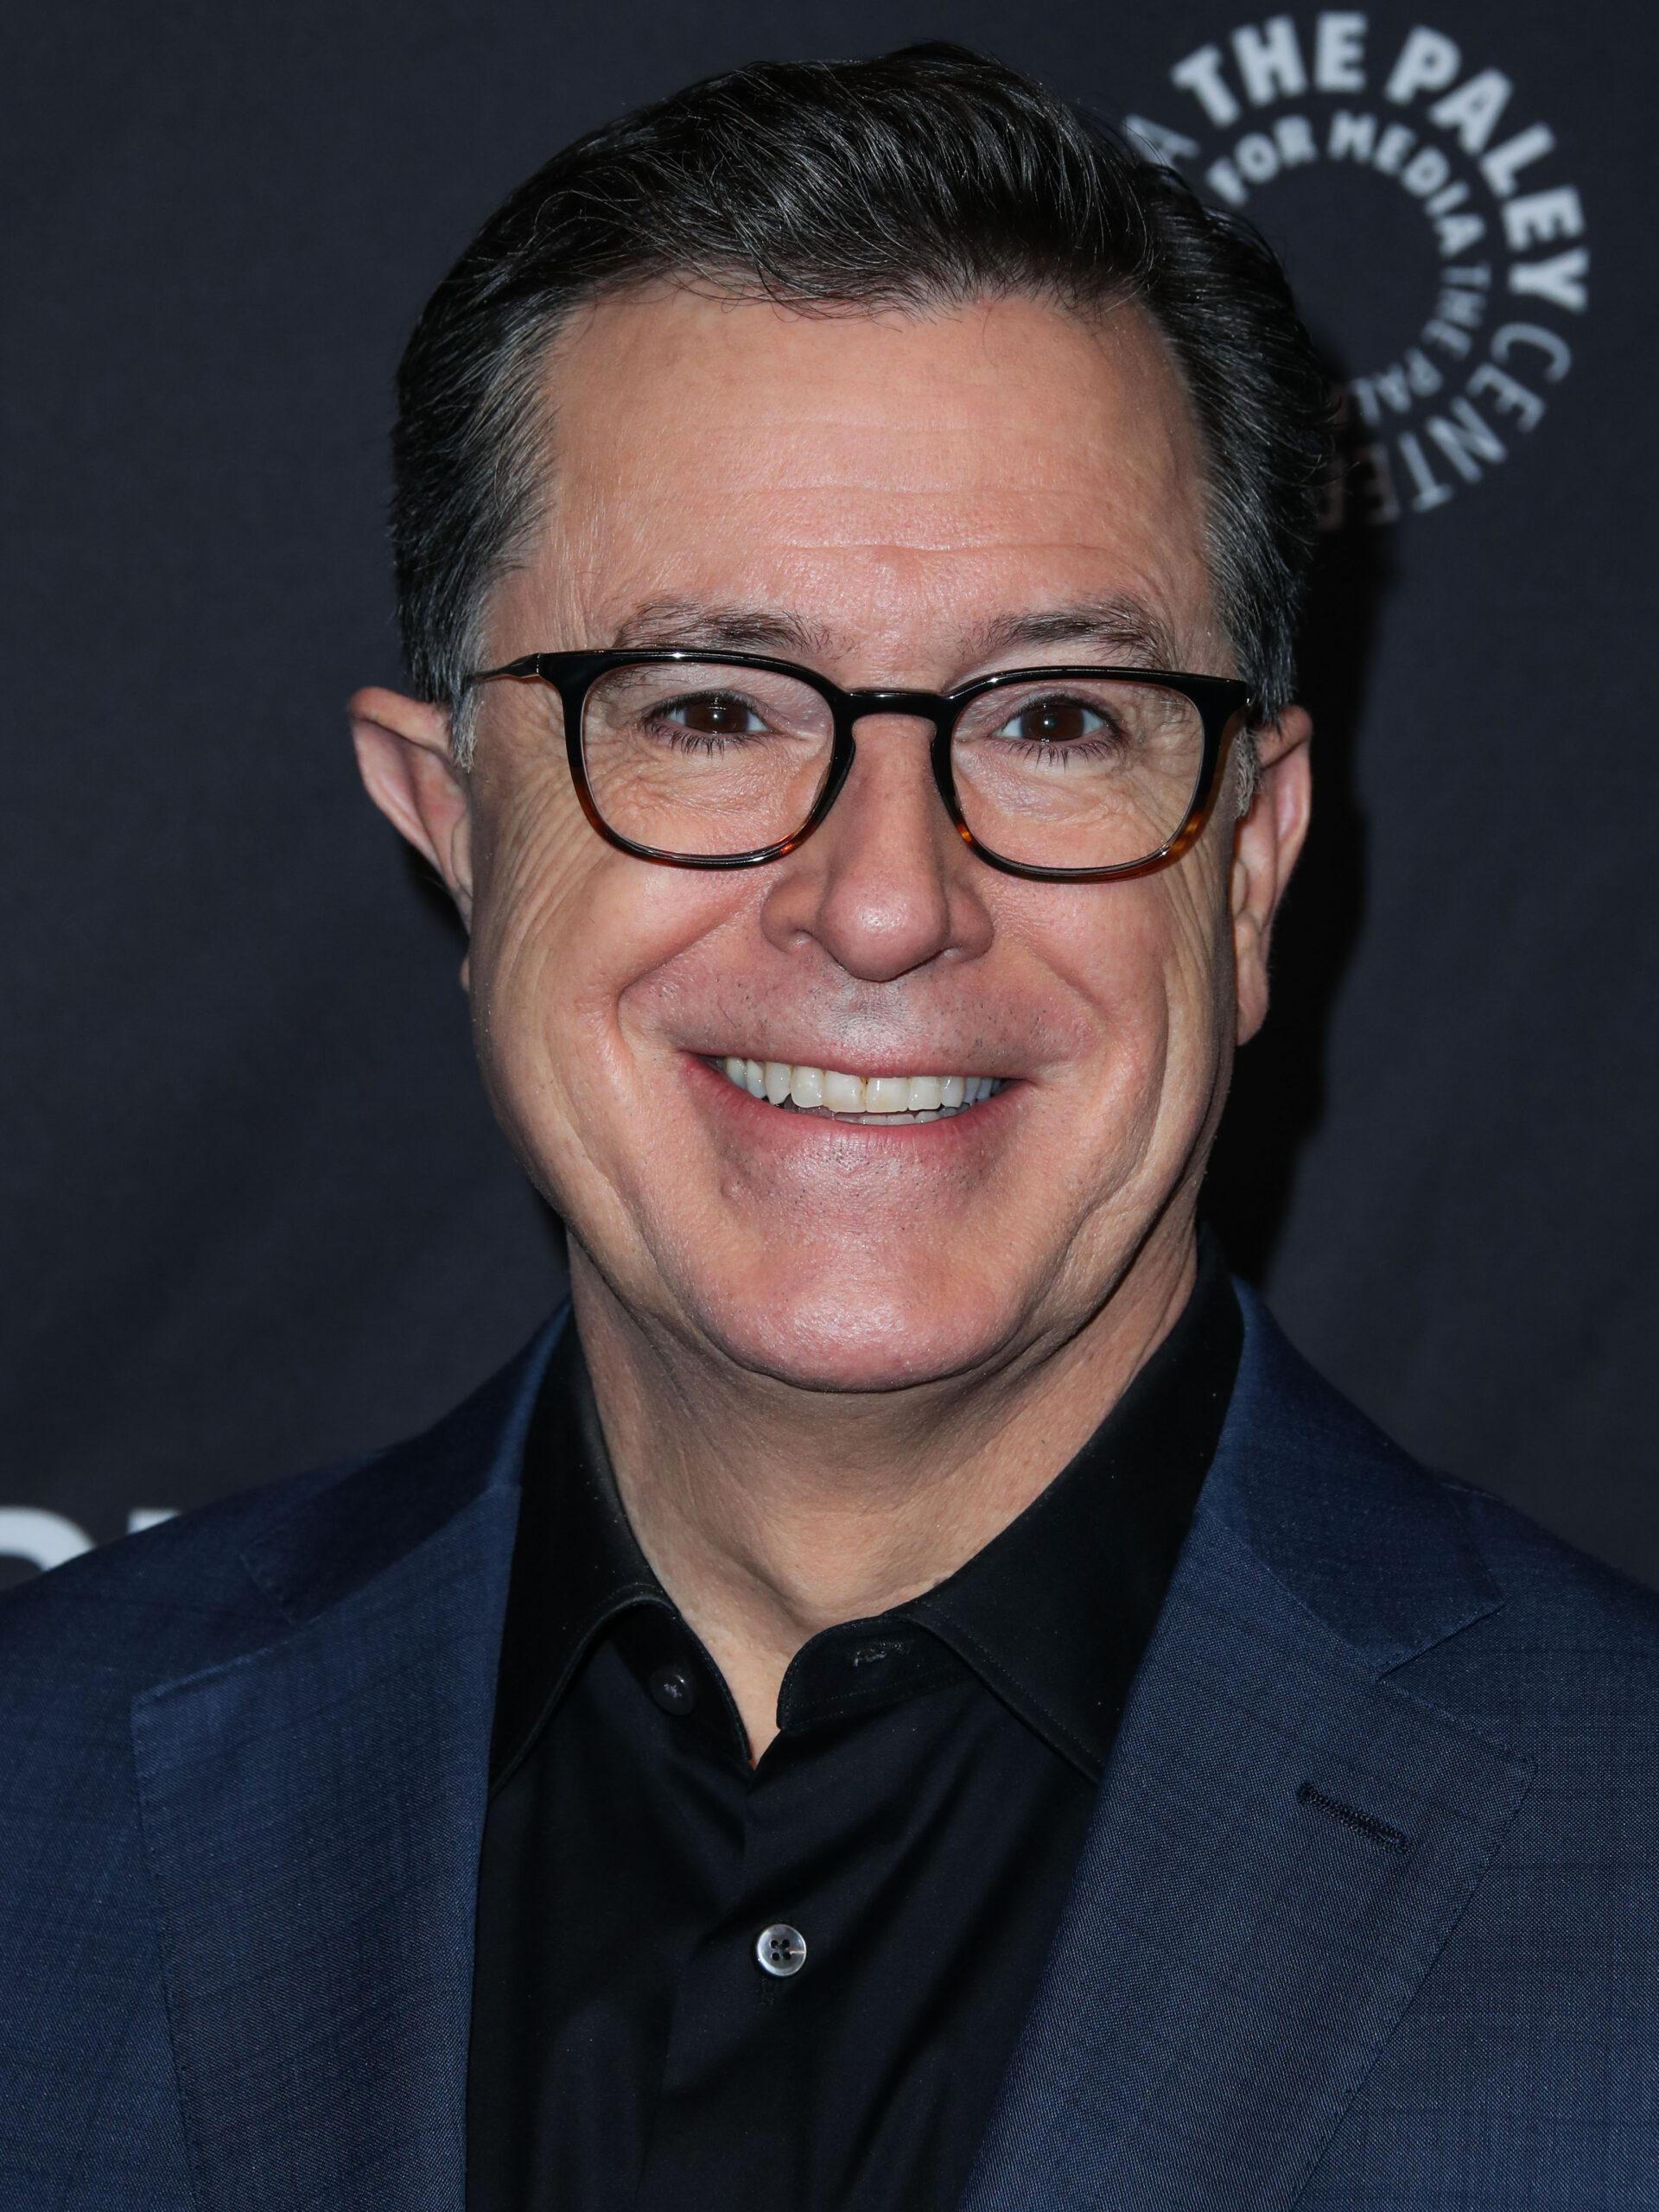 Host of the late show stephen colbert